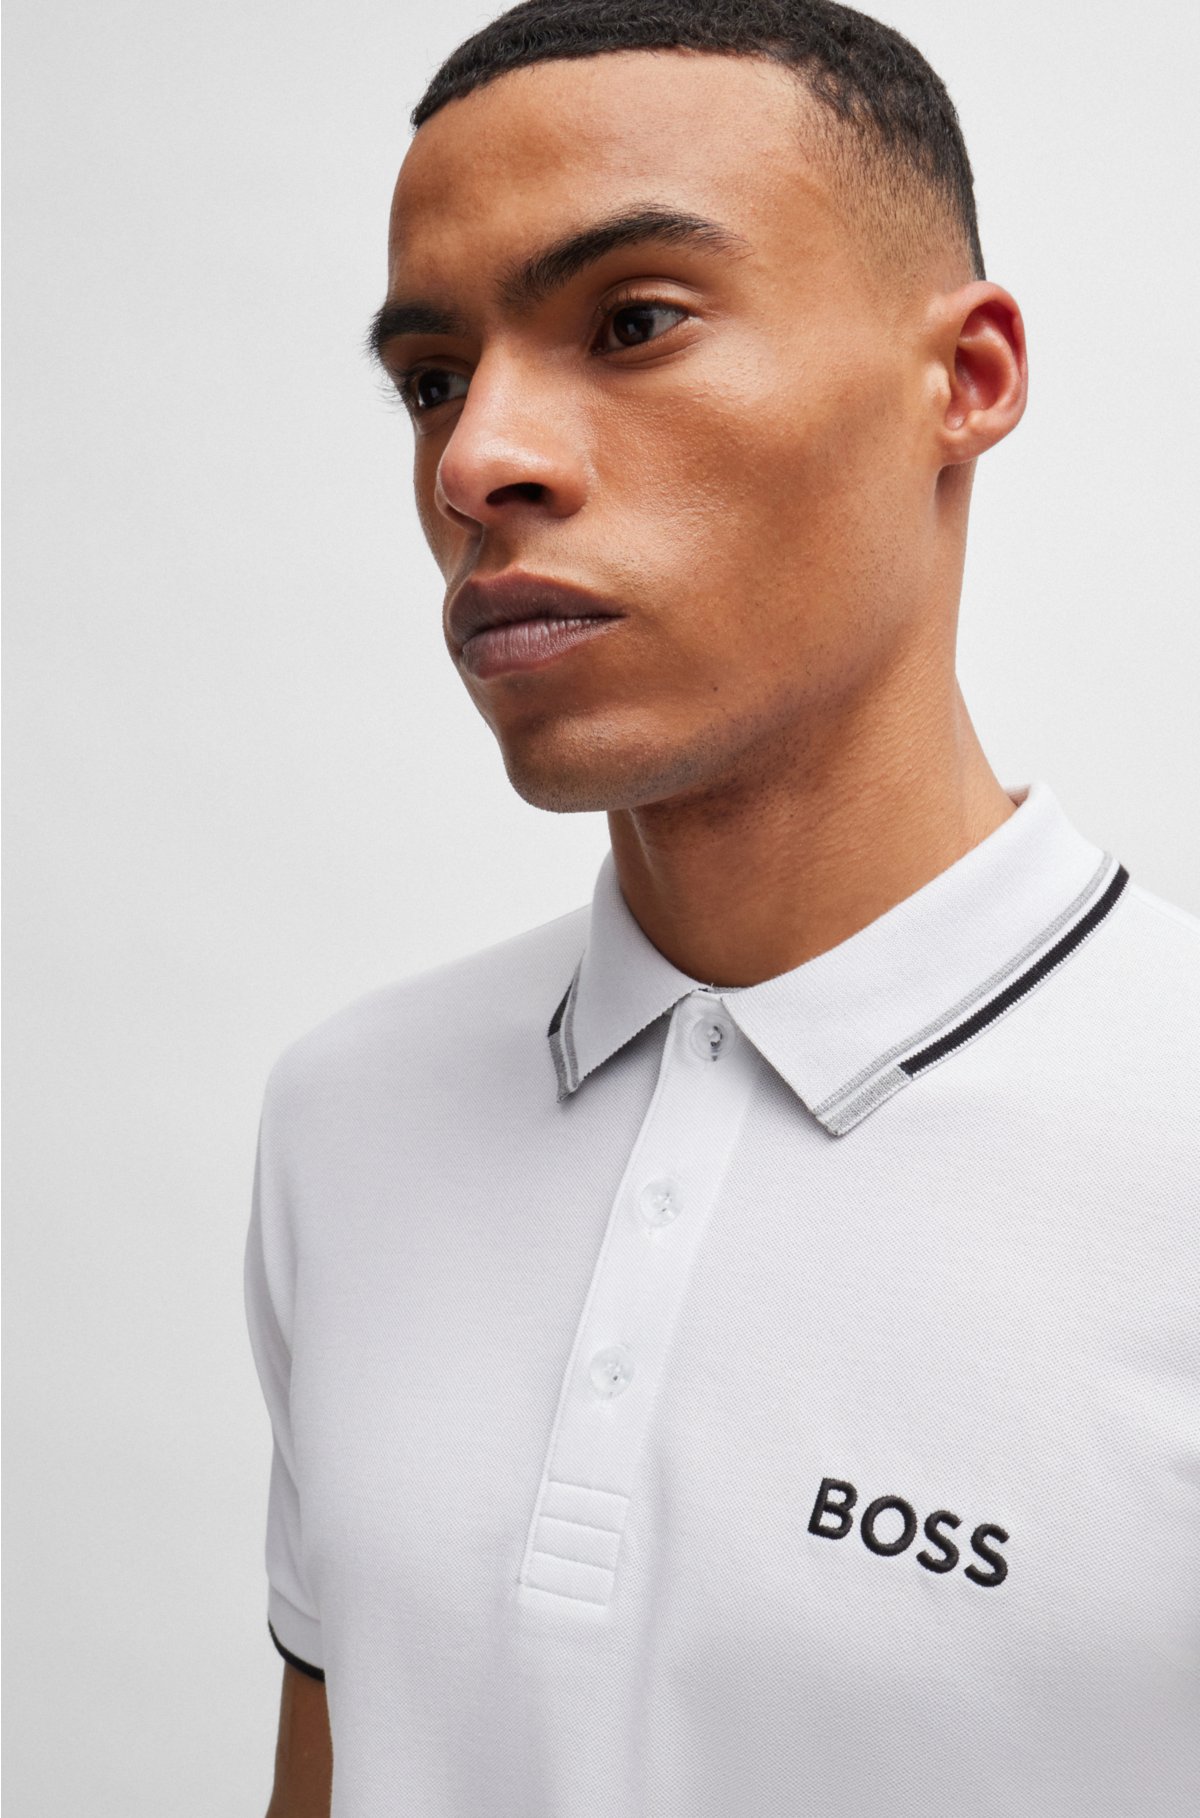 with Polo BOSS shirt logos contrast -